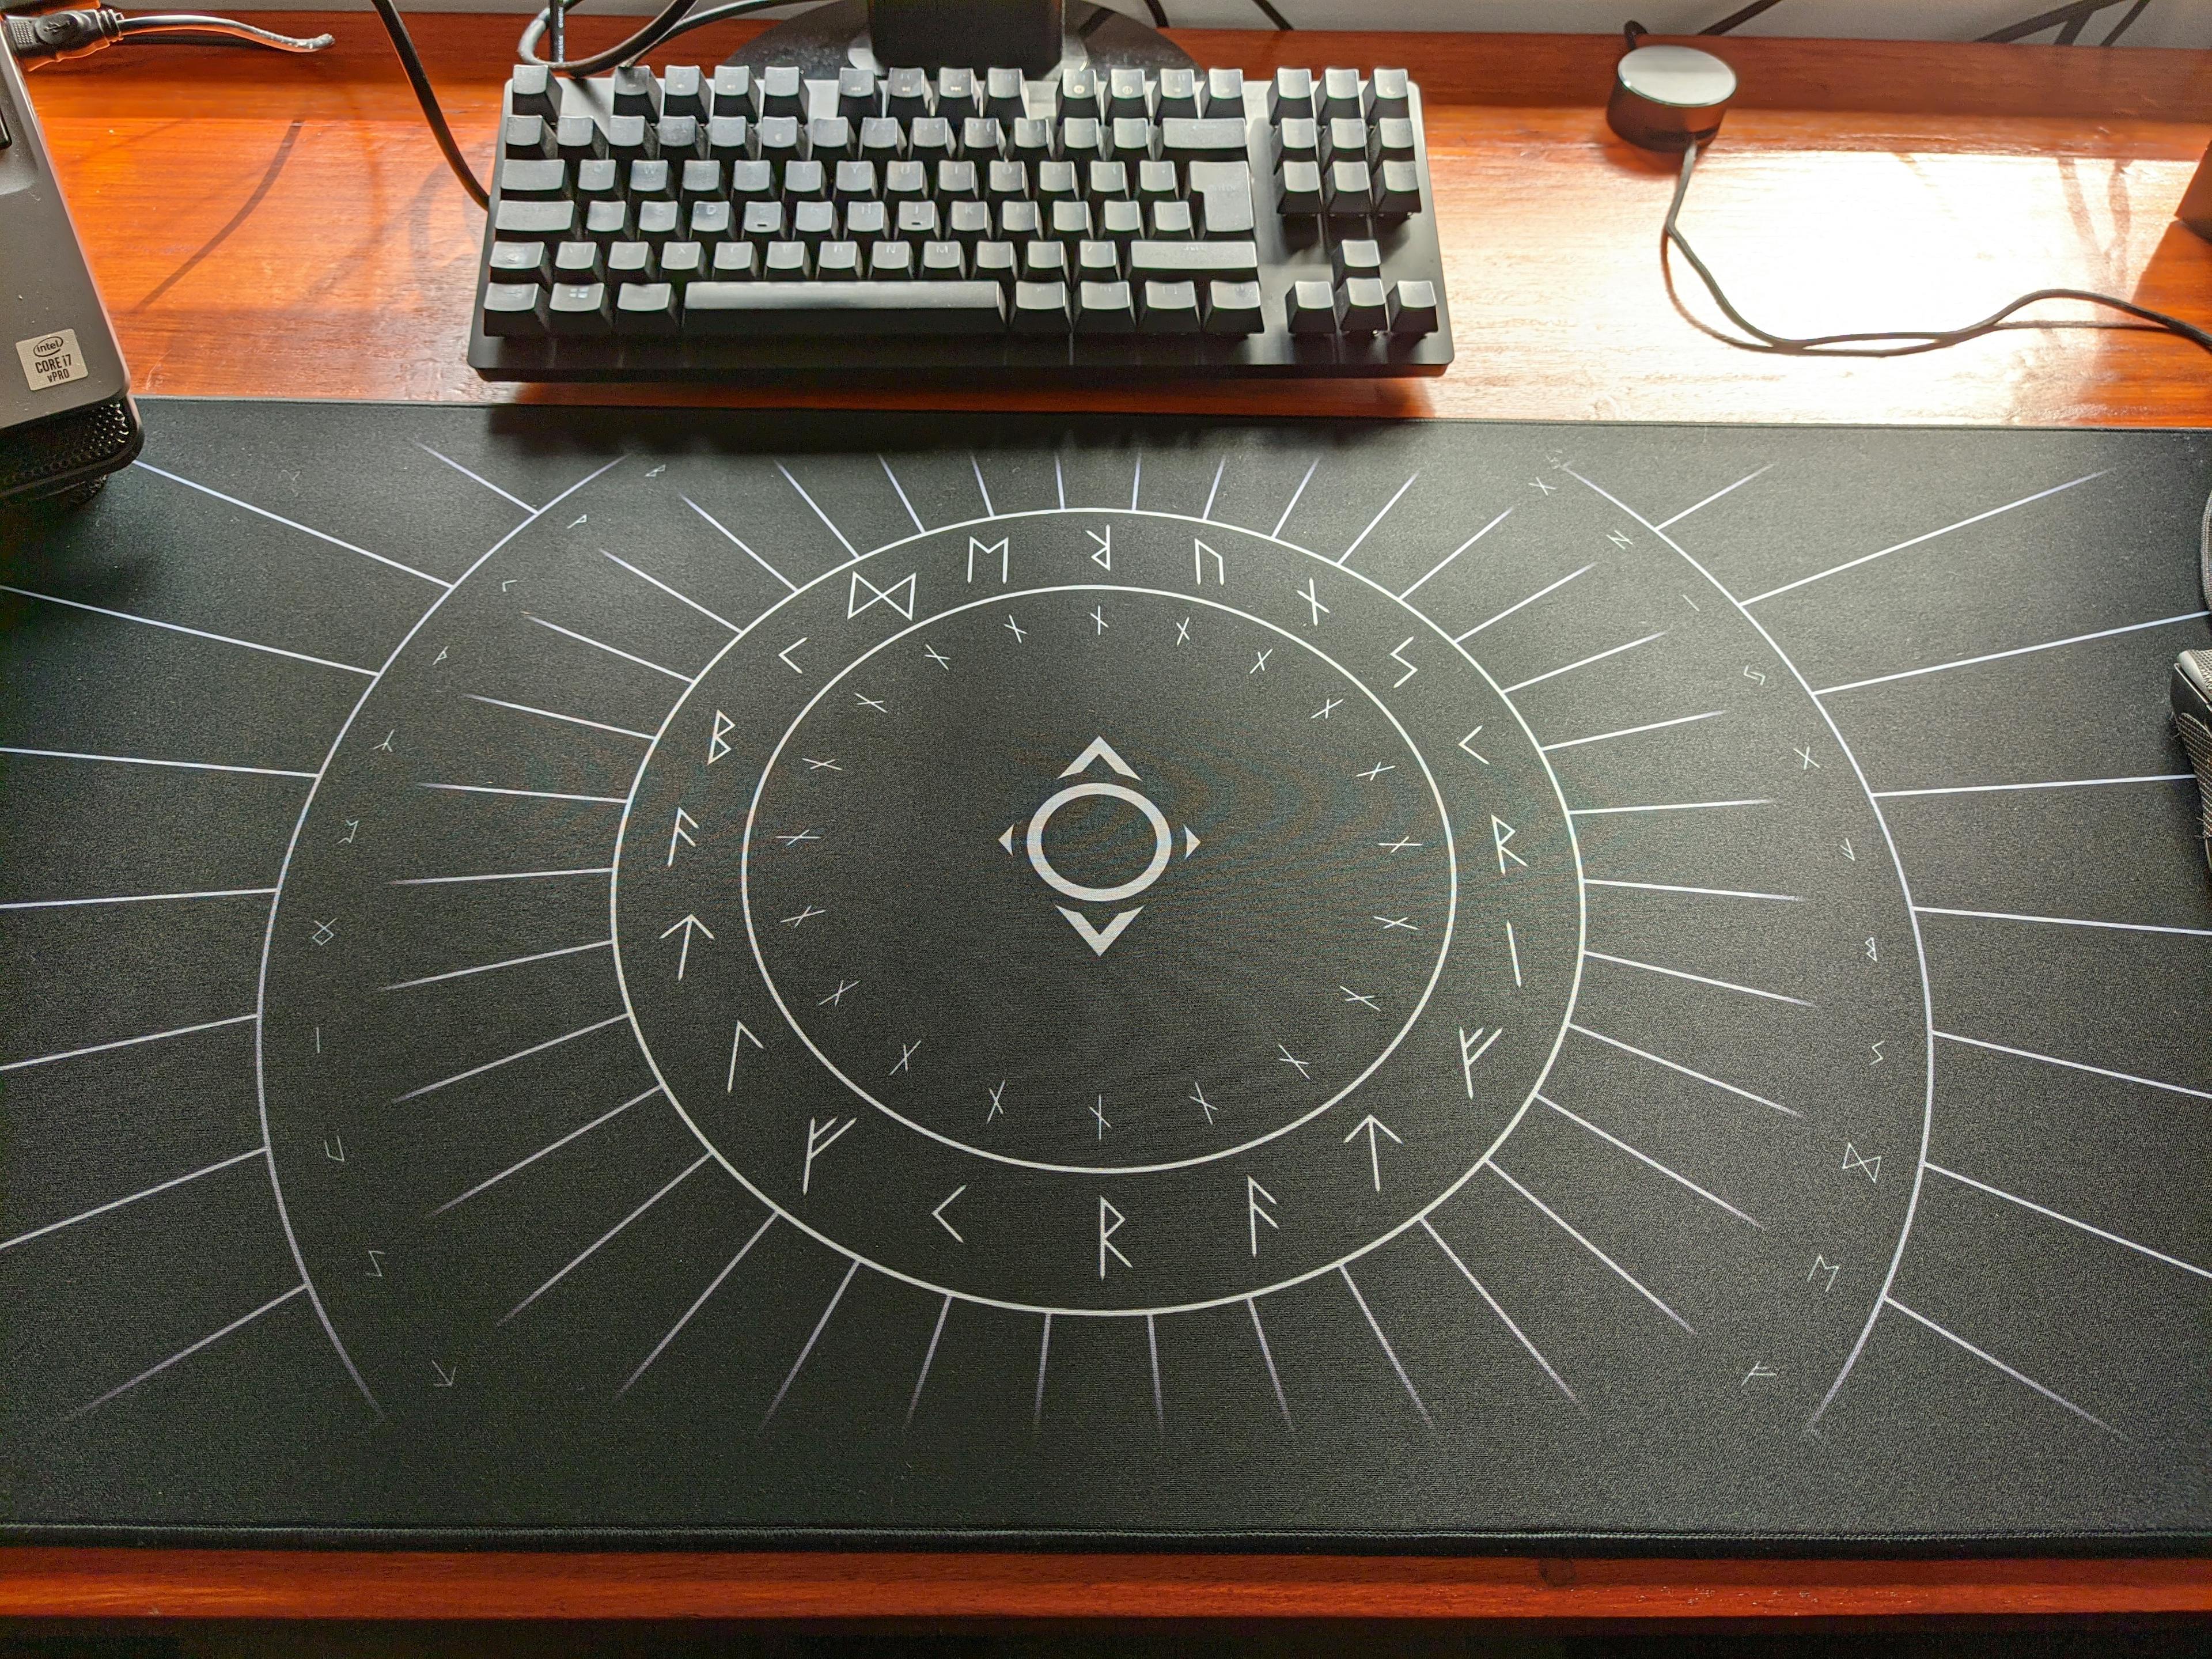 Review photo of deskmat by JhonDoe